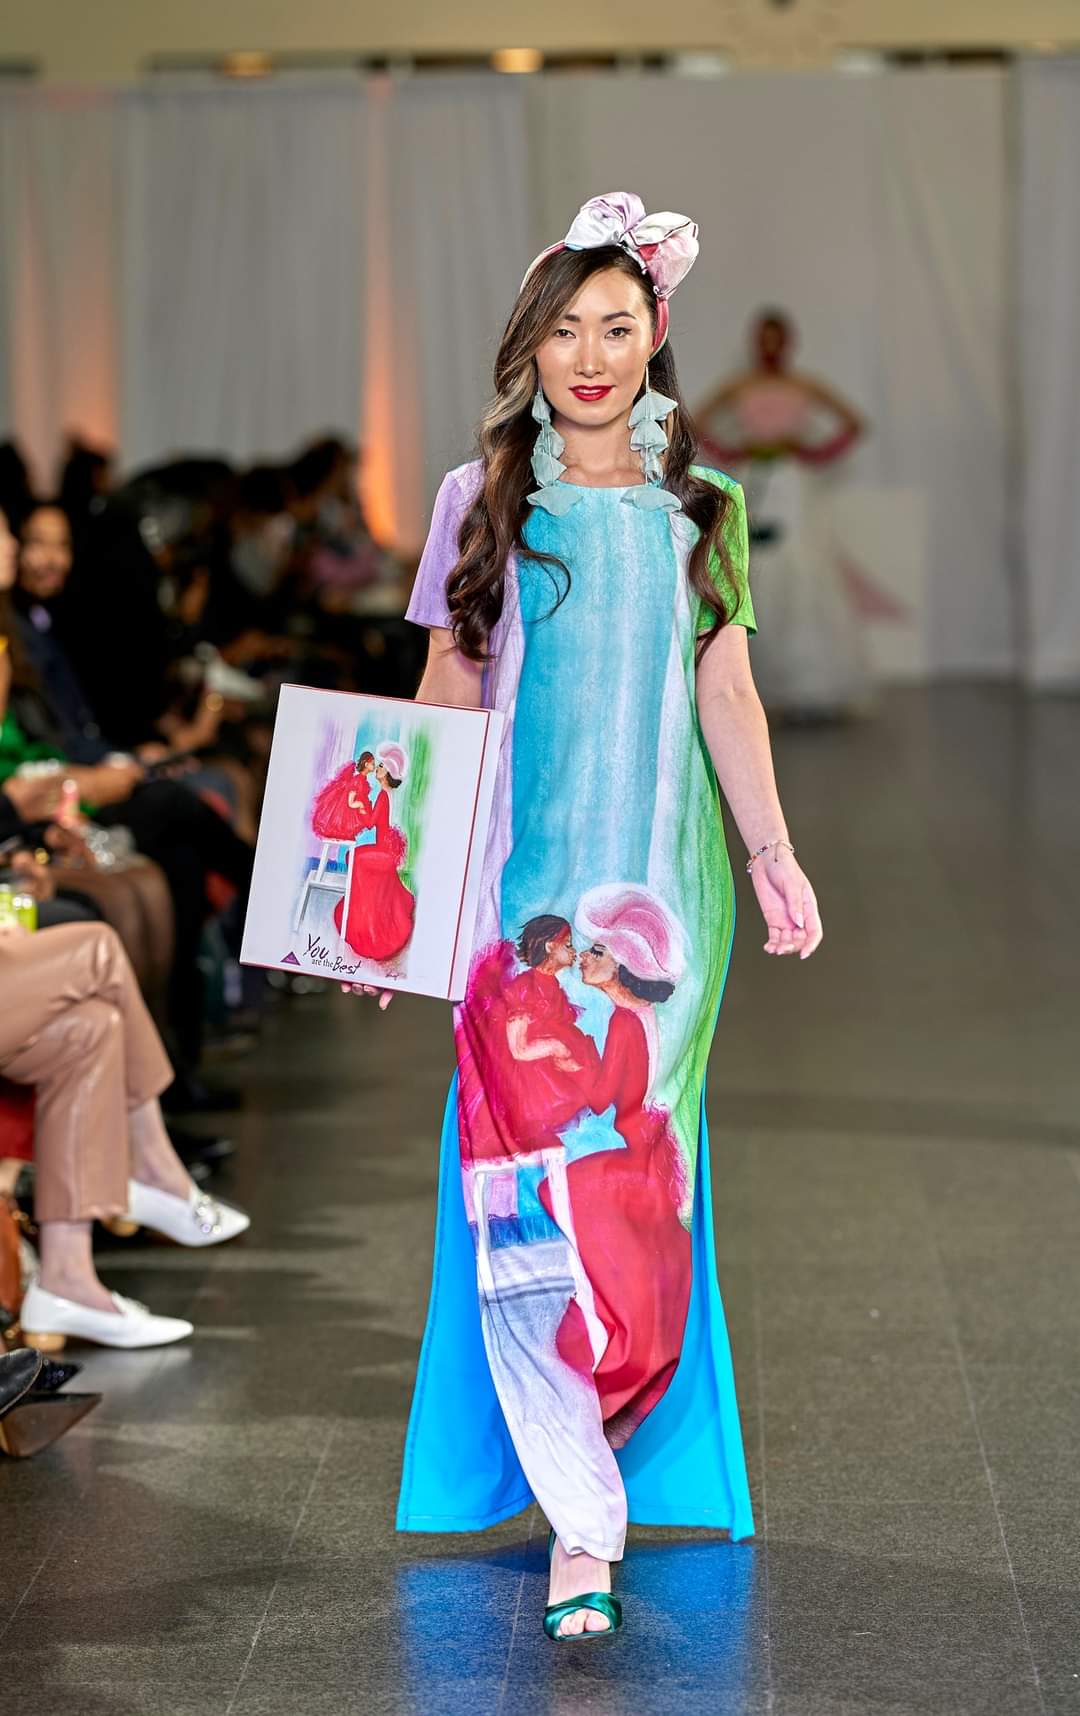 Summer Bright Maxi Dress With Sleeves Wearable Art YOU ARE THE BEST by artist Alesia Chaika Made In USA Featured at the Museum Of Contemporary Art Chicago in the charity runway fashion show and artworks exhibition